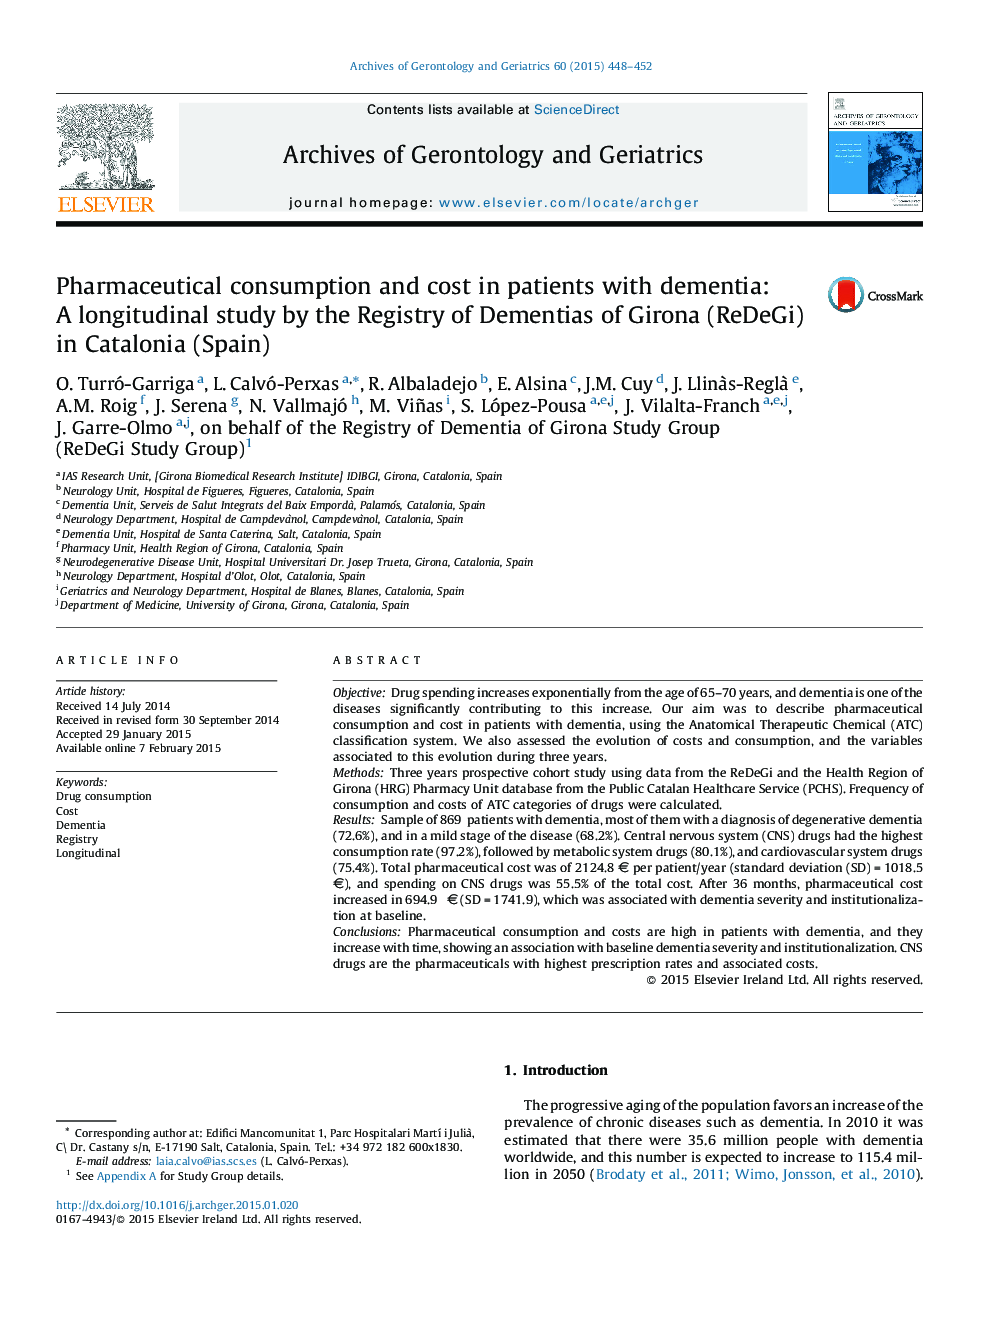 Pharmaceutical consumption and cost in patients with dementia: A longitudinal study by the Registry of Dementias of Girona (ReDeGi) in Catalonia (Spain)